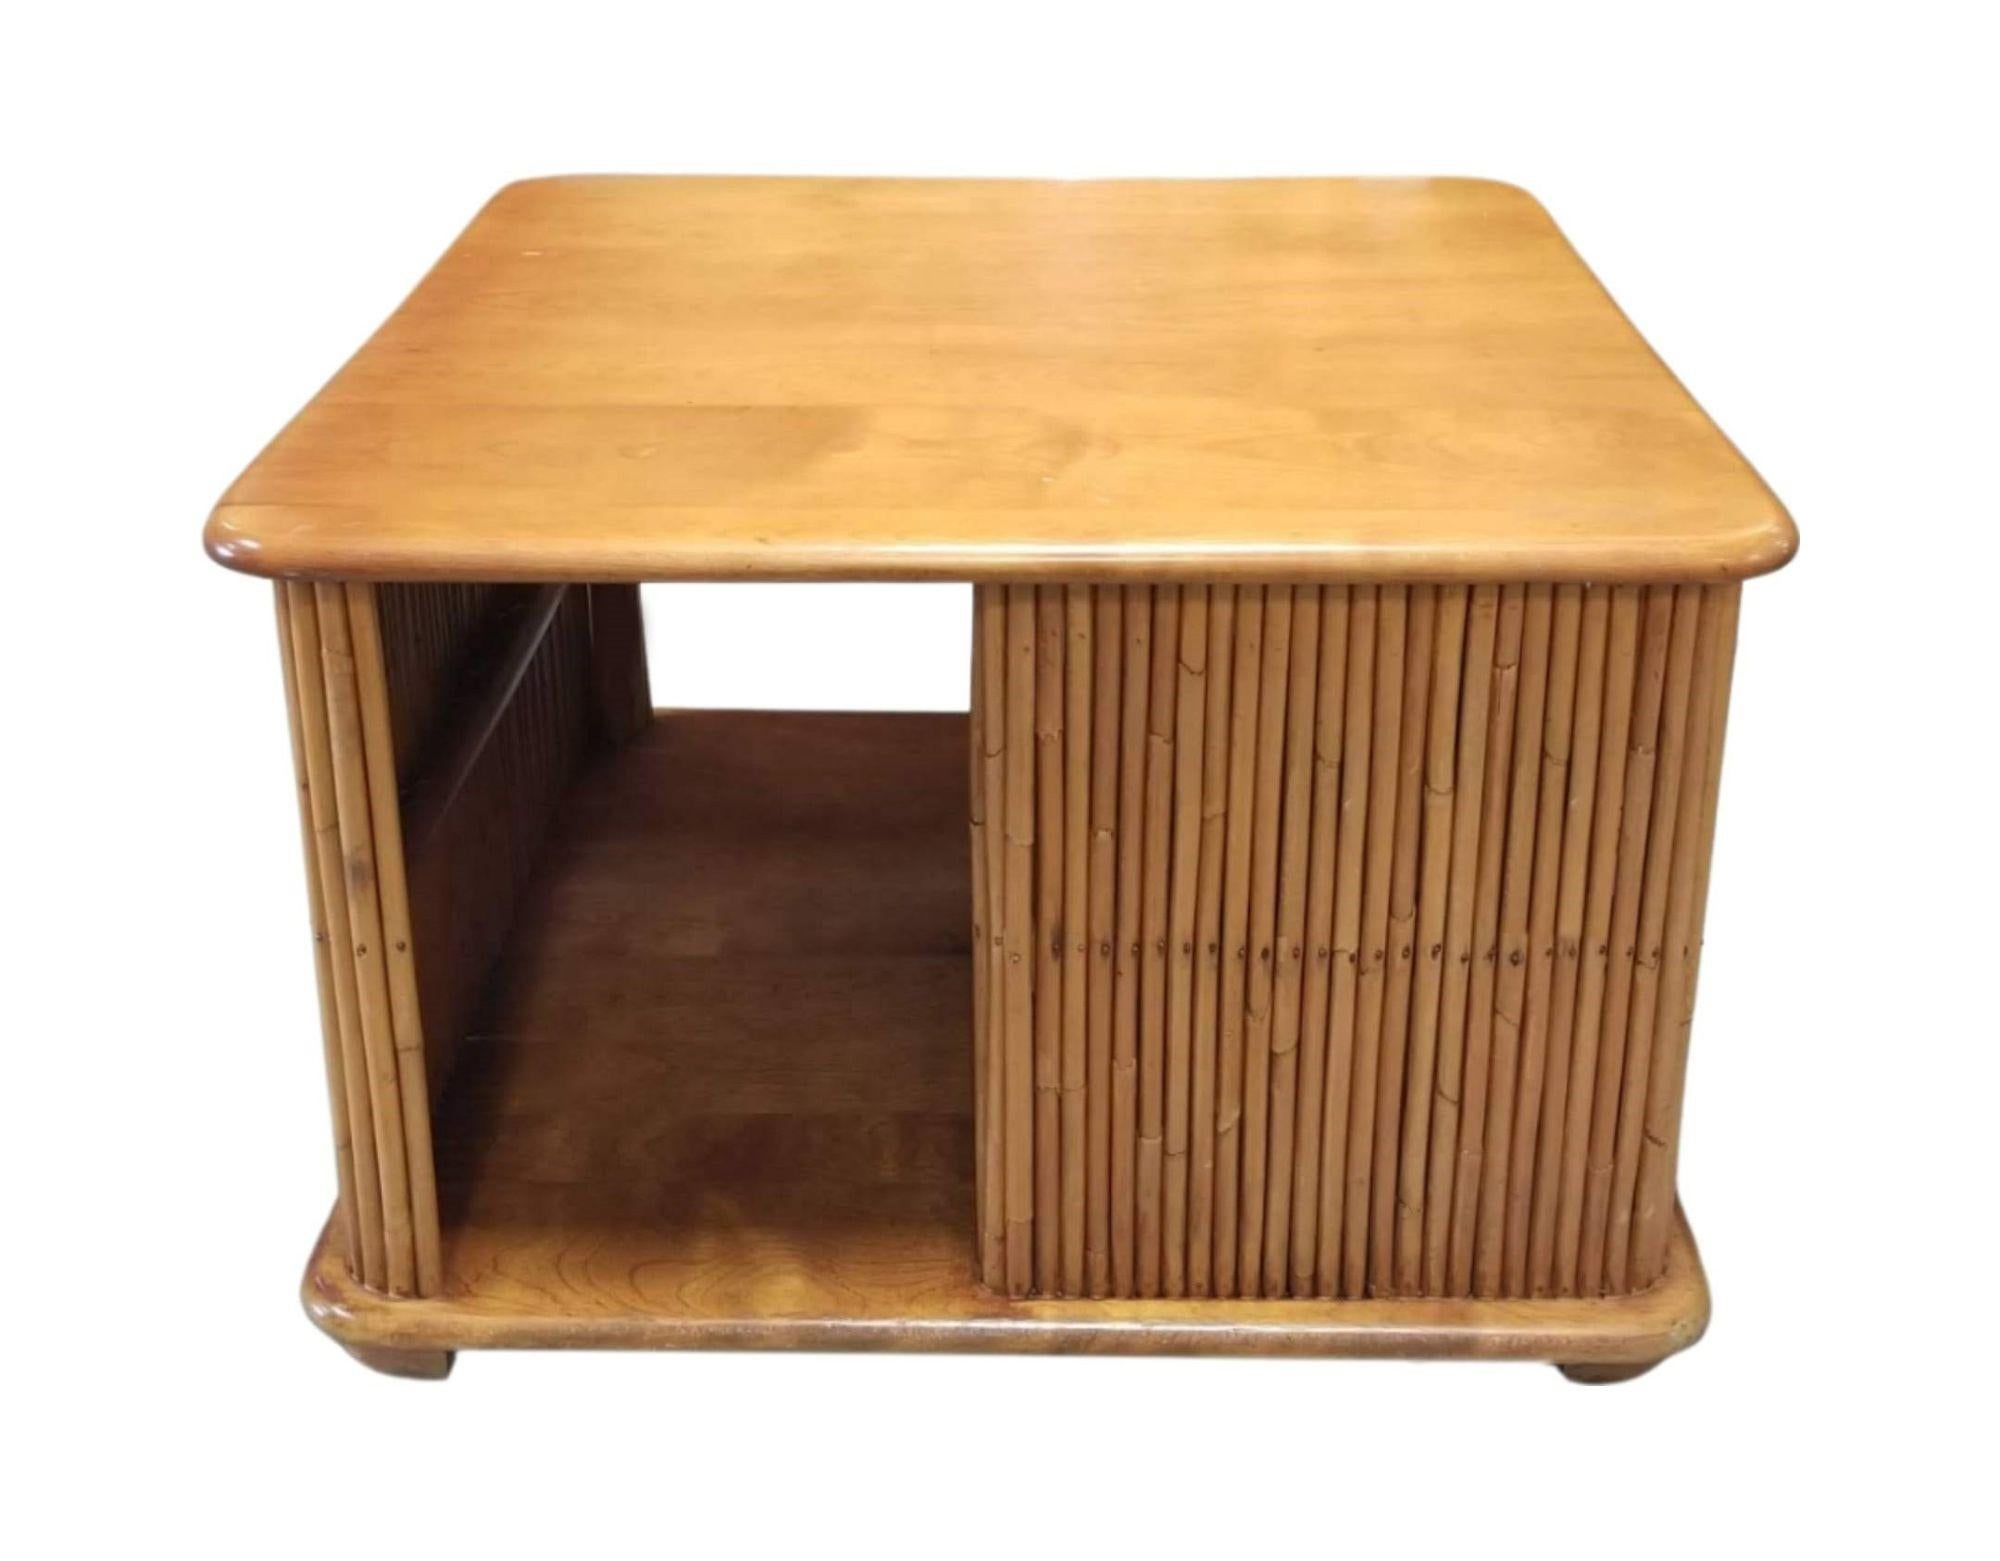 Unique square coffee table with bottom shelf and compartments separated by vertically stacked reed rattan sides, featuring a maple wood top. Original by designer Paul Frankl.
There are minor scratches on table top, as shown in photos.
We only